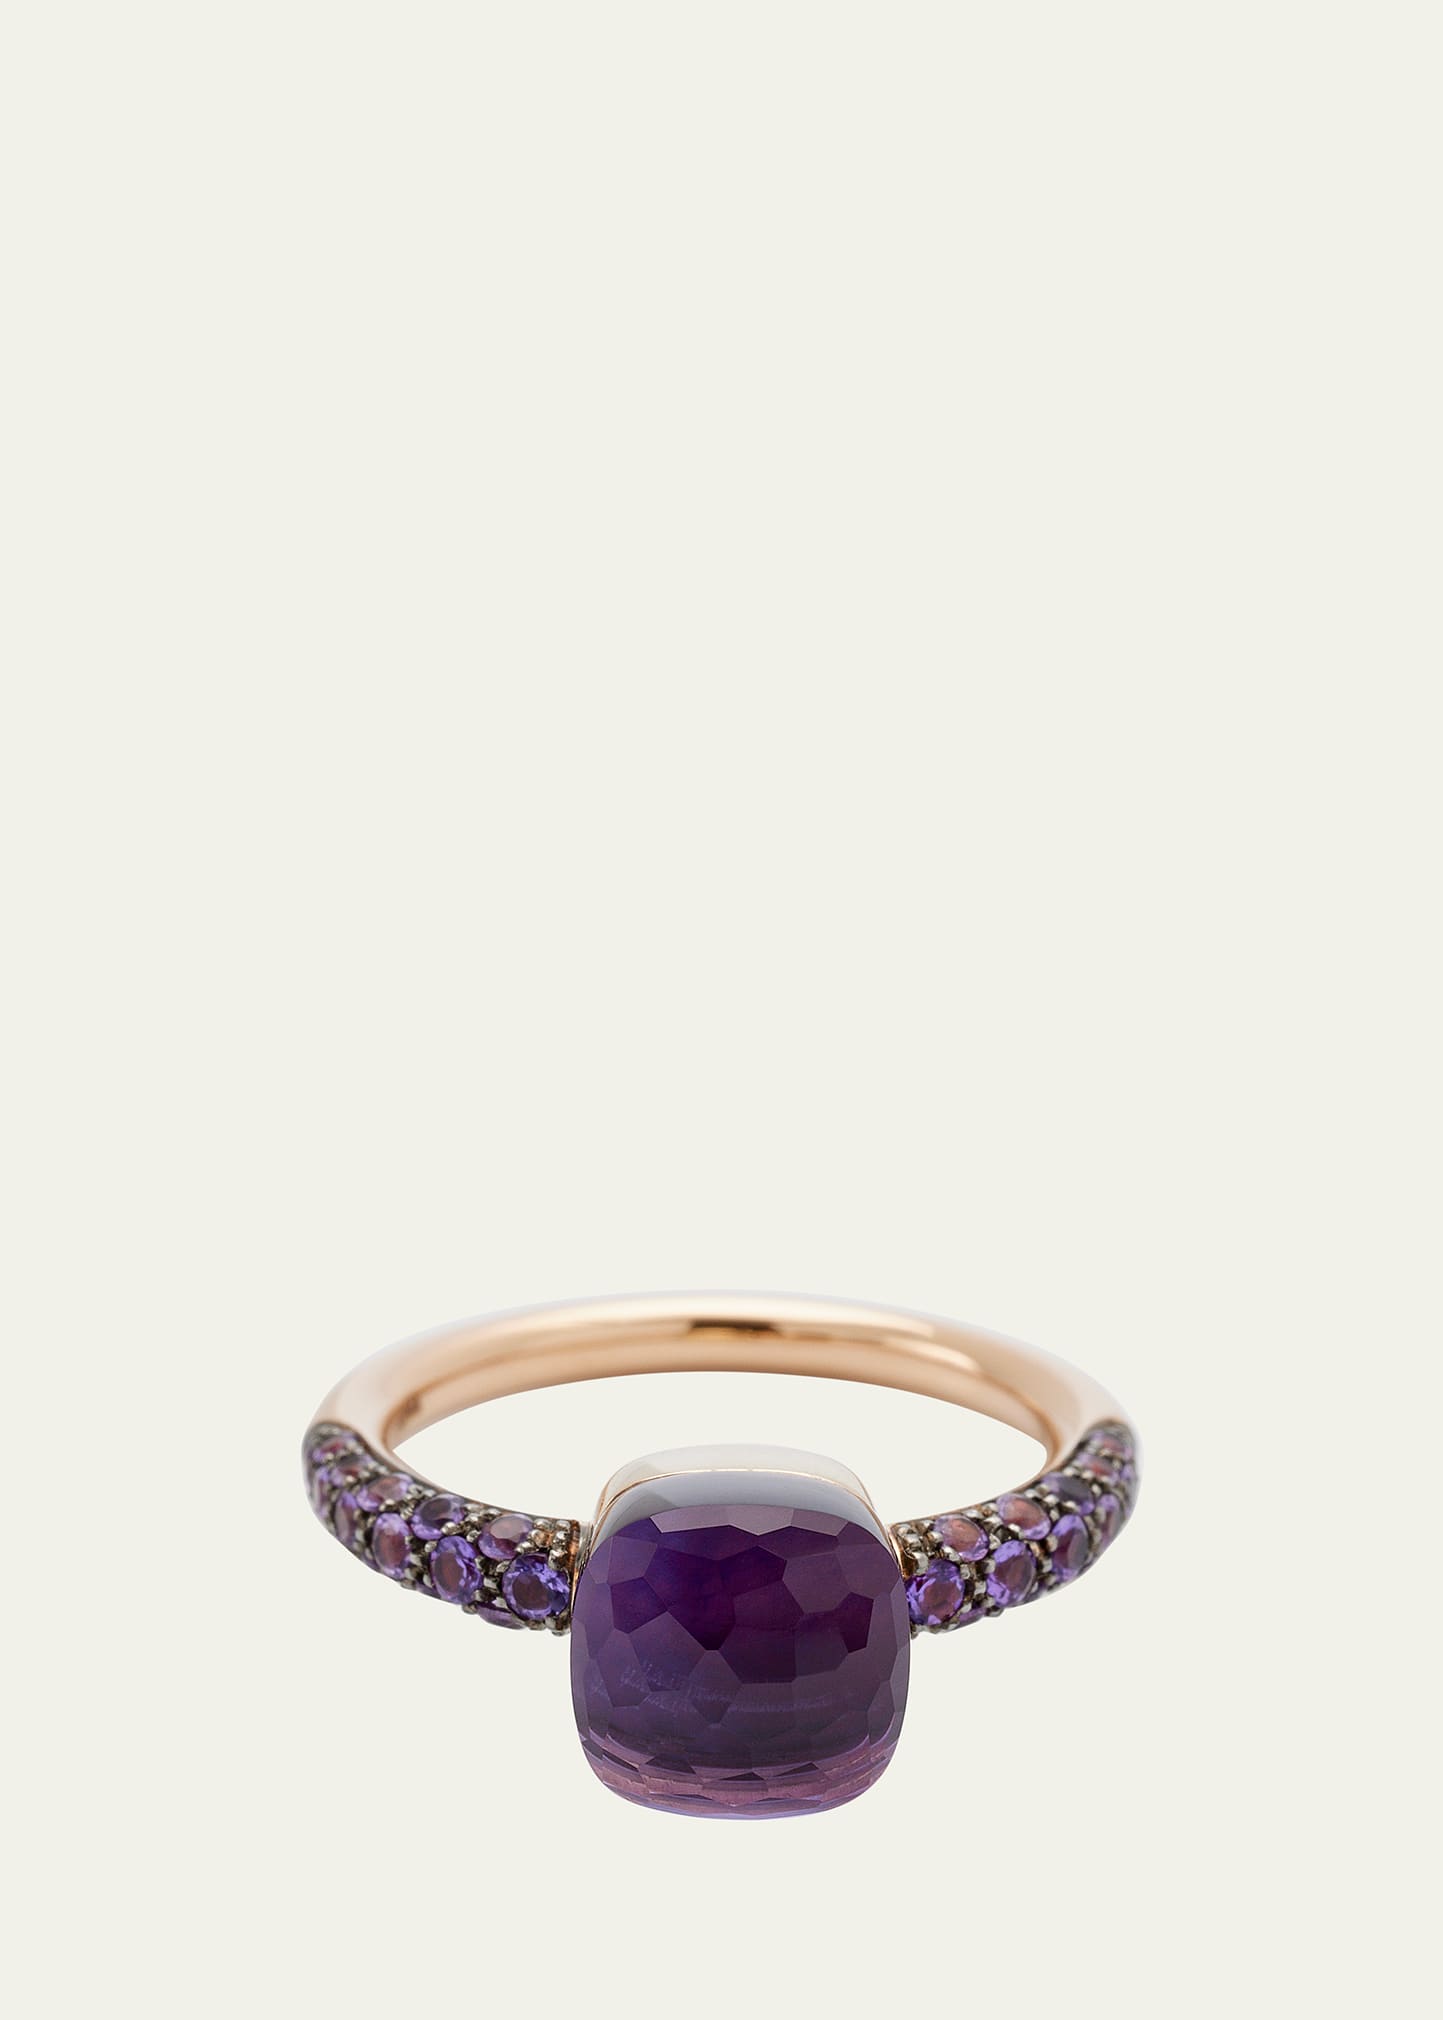 Pomellato Nudo Petit 18kt Rose And White Gold Ring With Amethyst And Jade In Purple